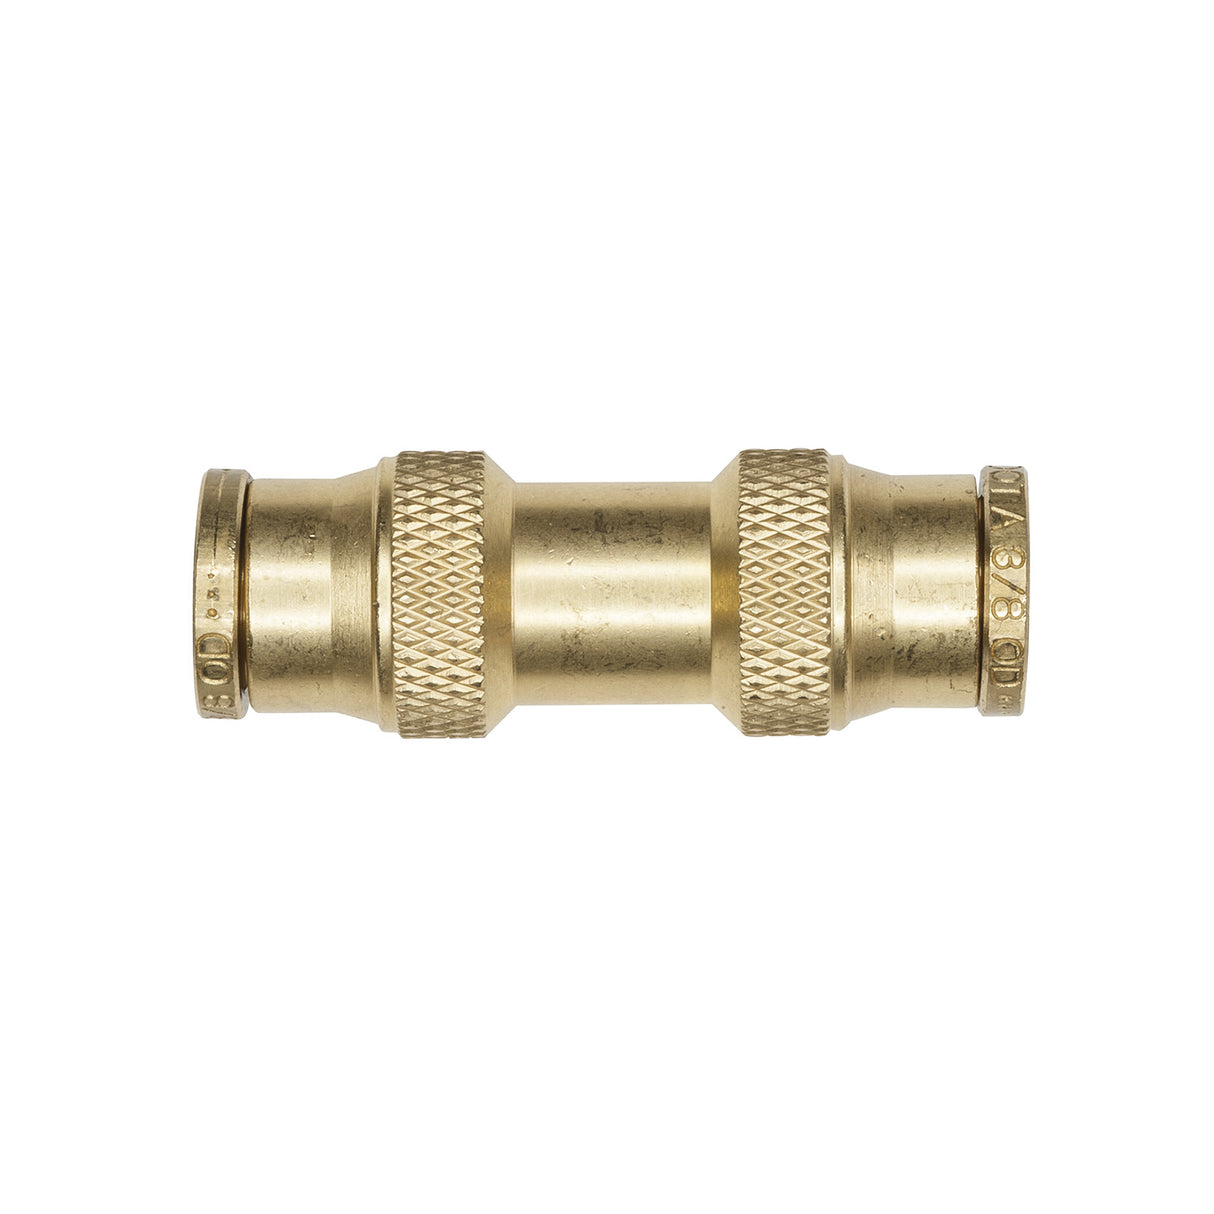 ALKON CORP ­-­ AQ62-DOT-3 ­-­ FITTING UNION CONNECTOR 3/16T